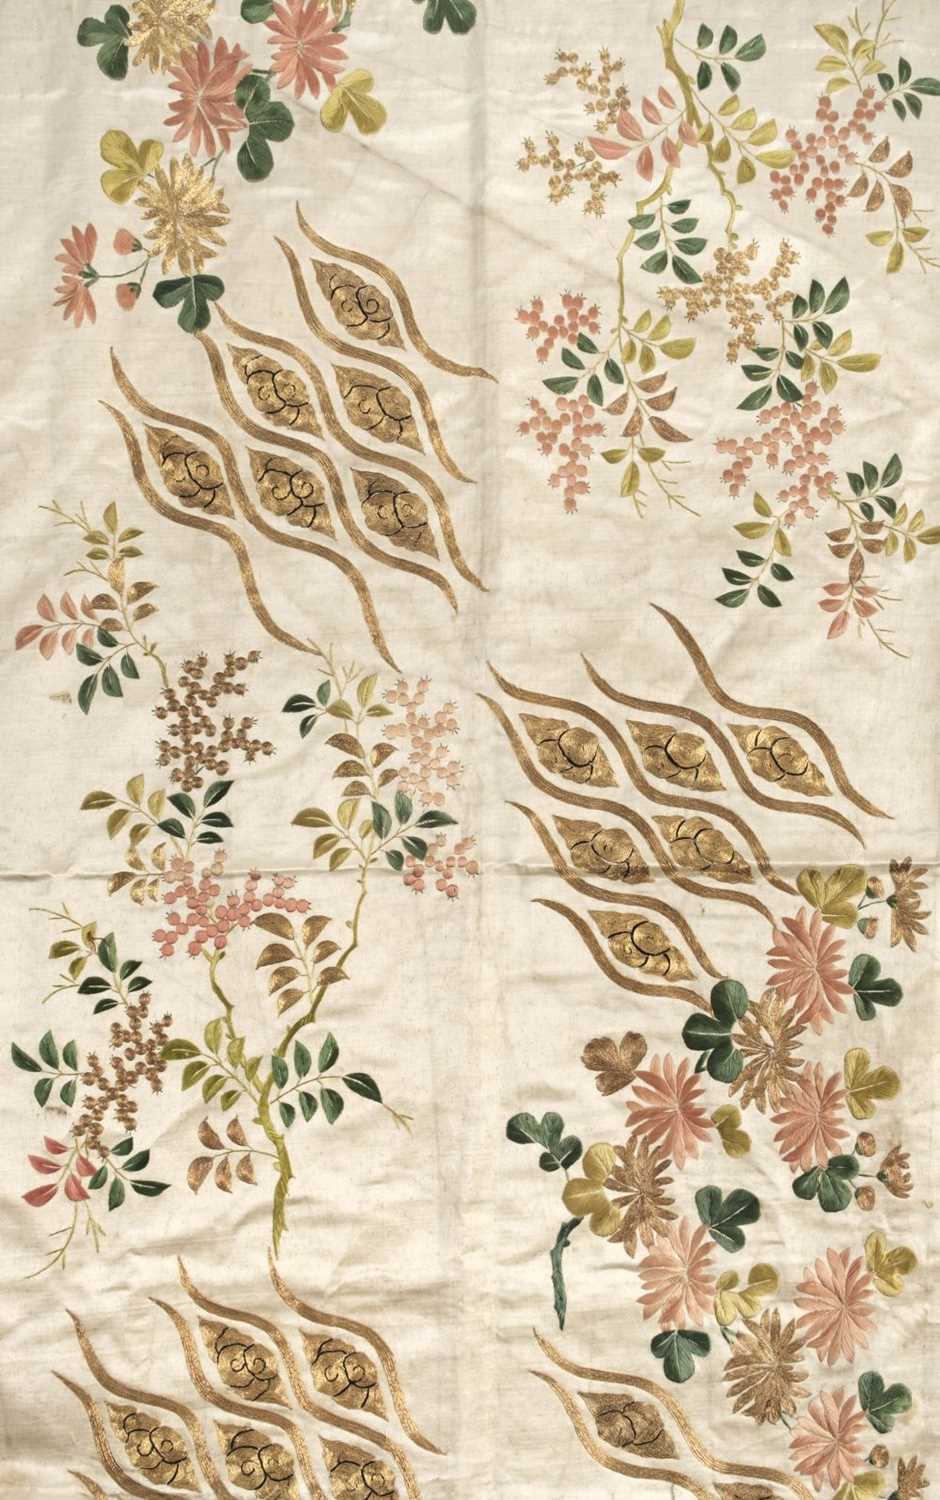 Lot 417 - Chinese embroidery. A large piece of embroidered silk, early 19th century